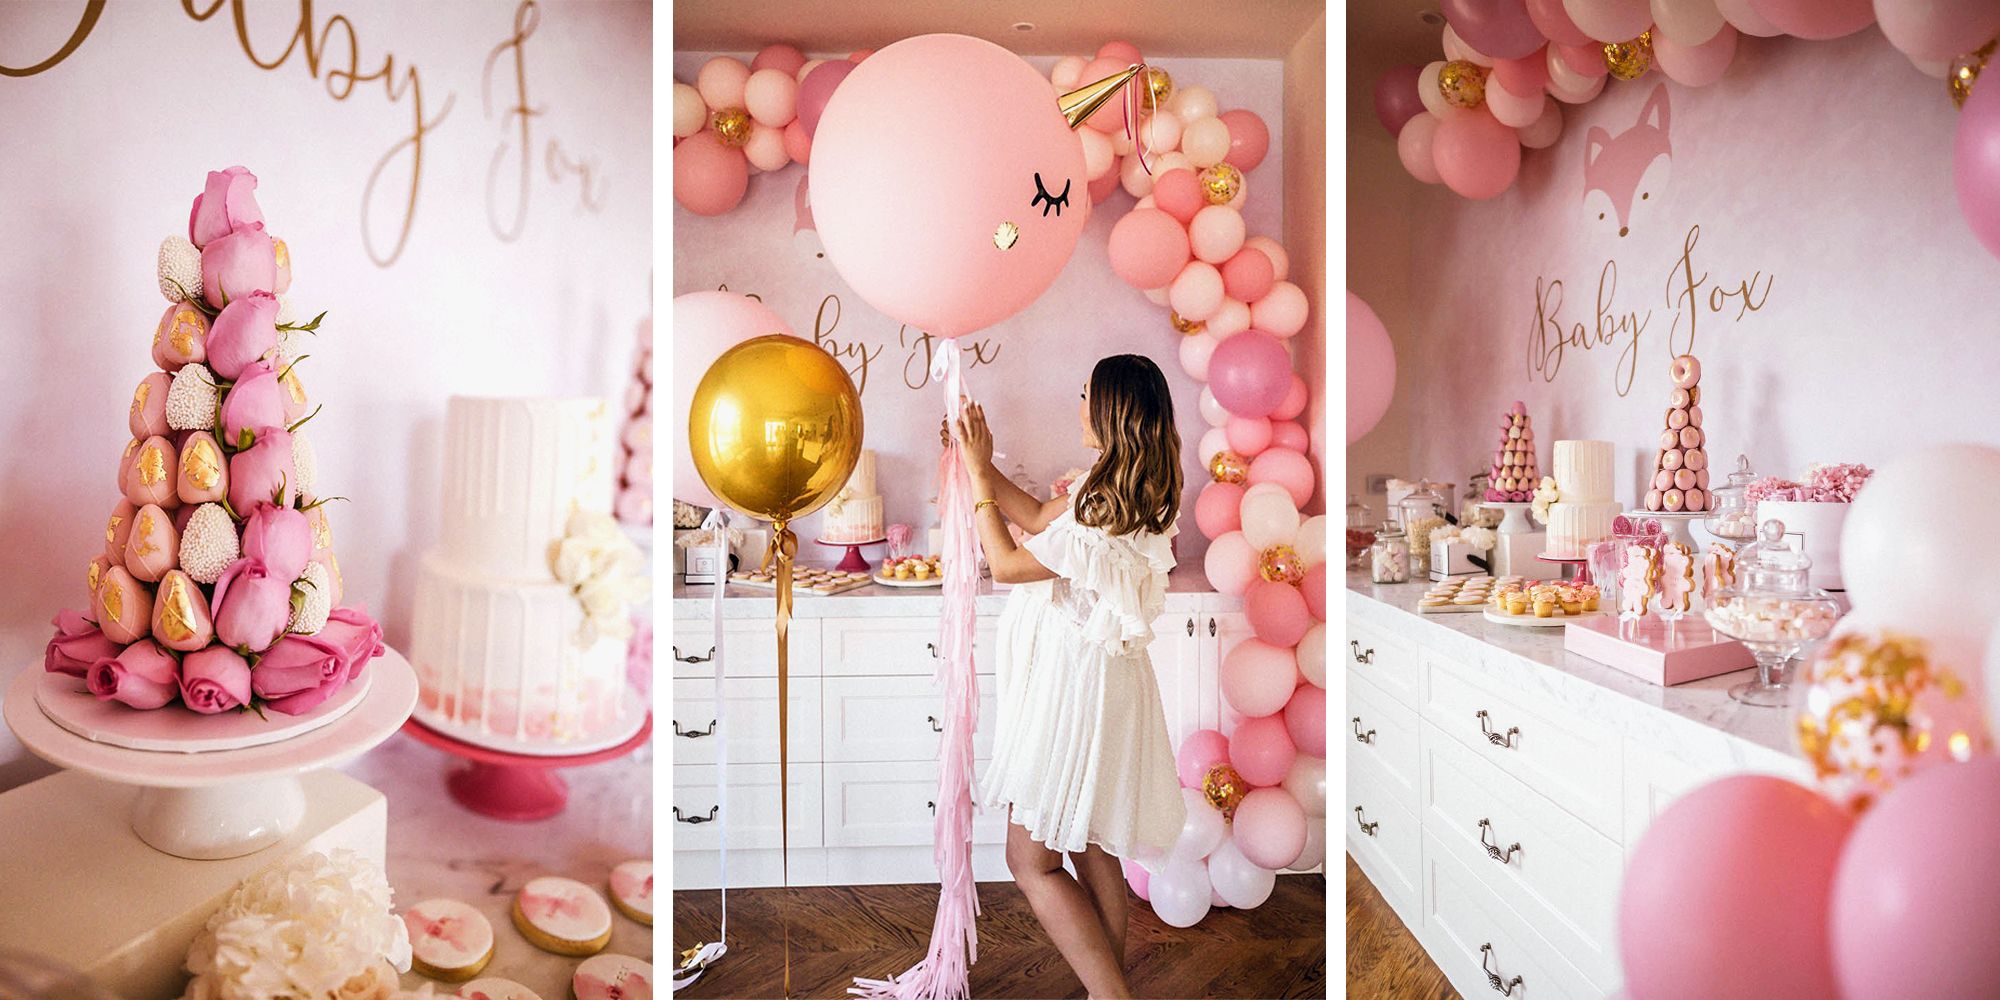 7 Best Baby Shower Ideas For 2018 Trendy Baby Shower Decorations Themes